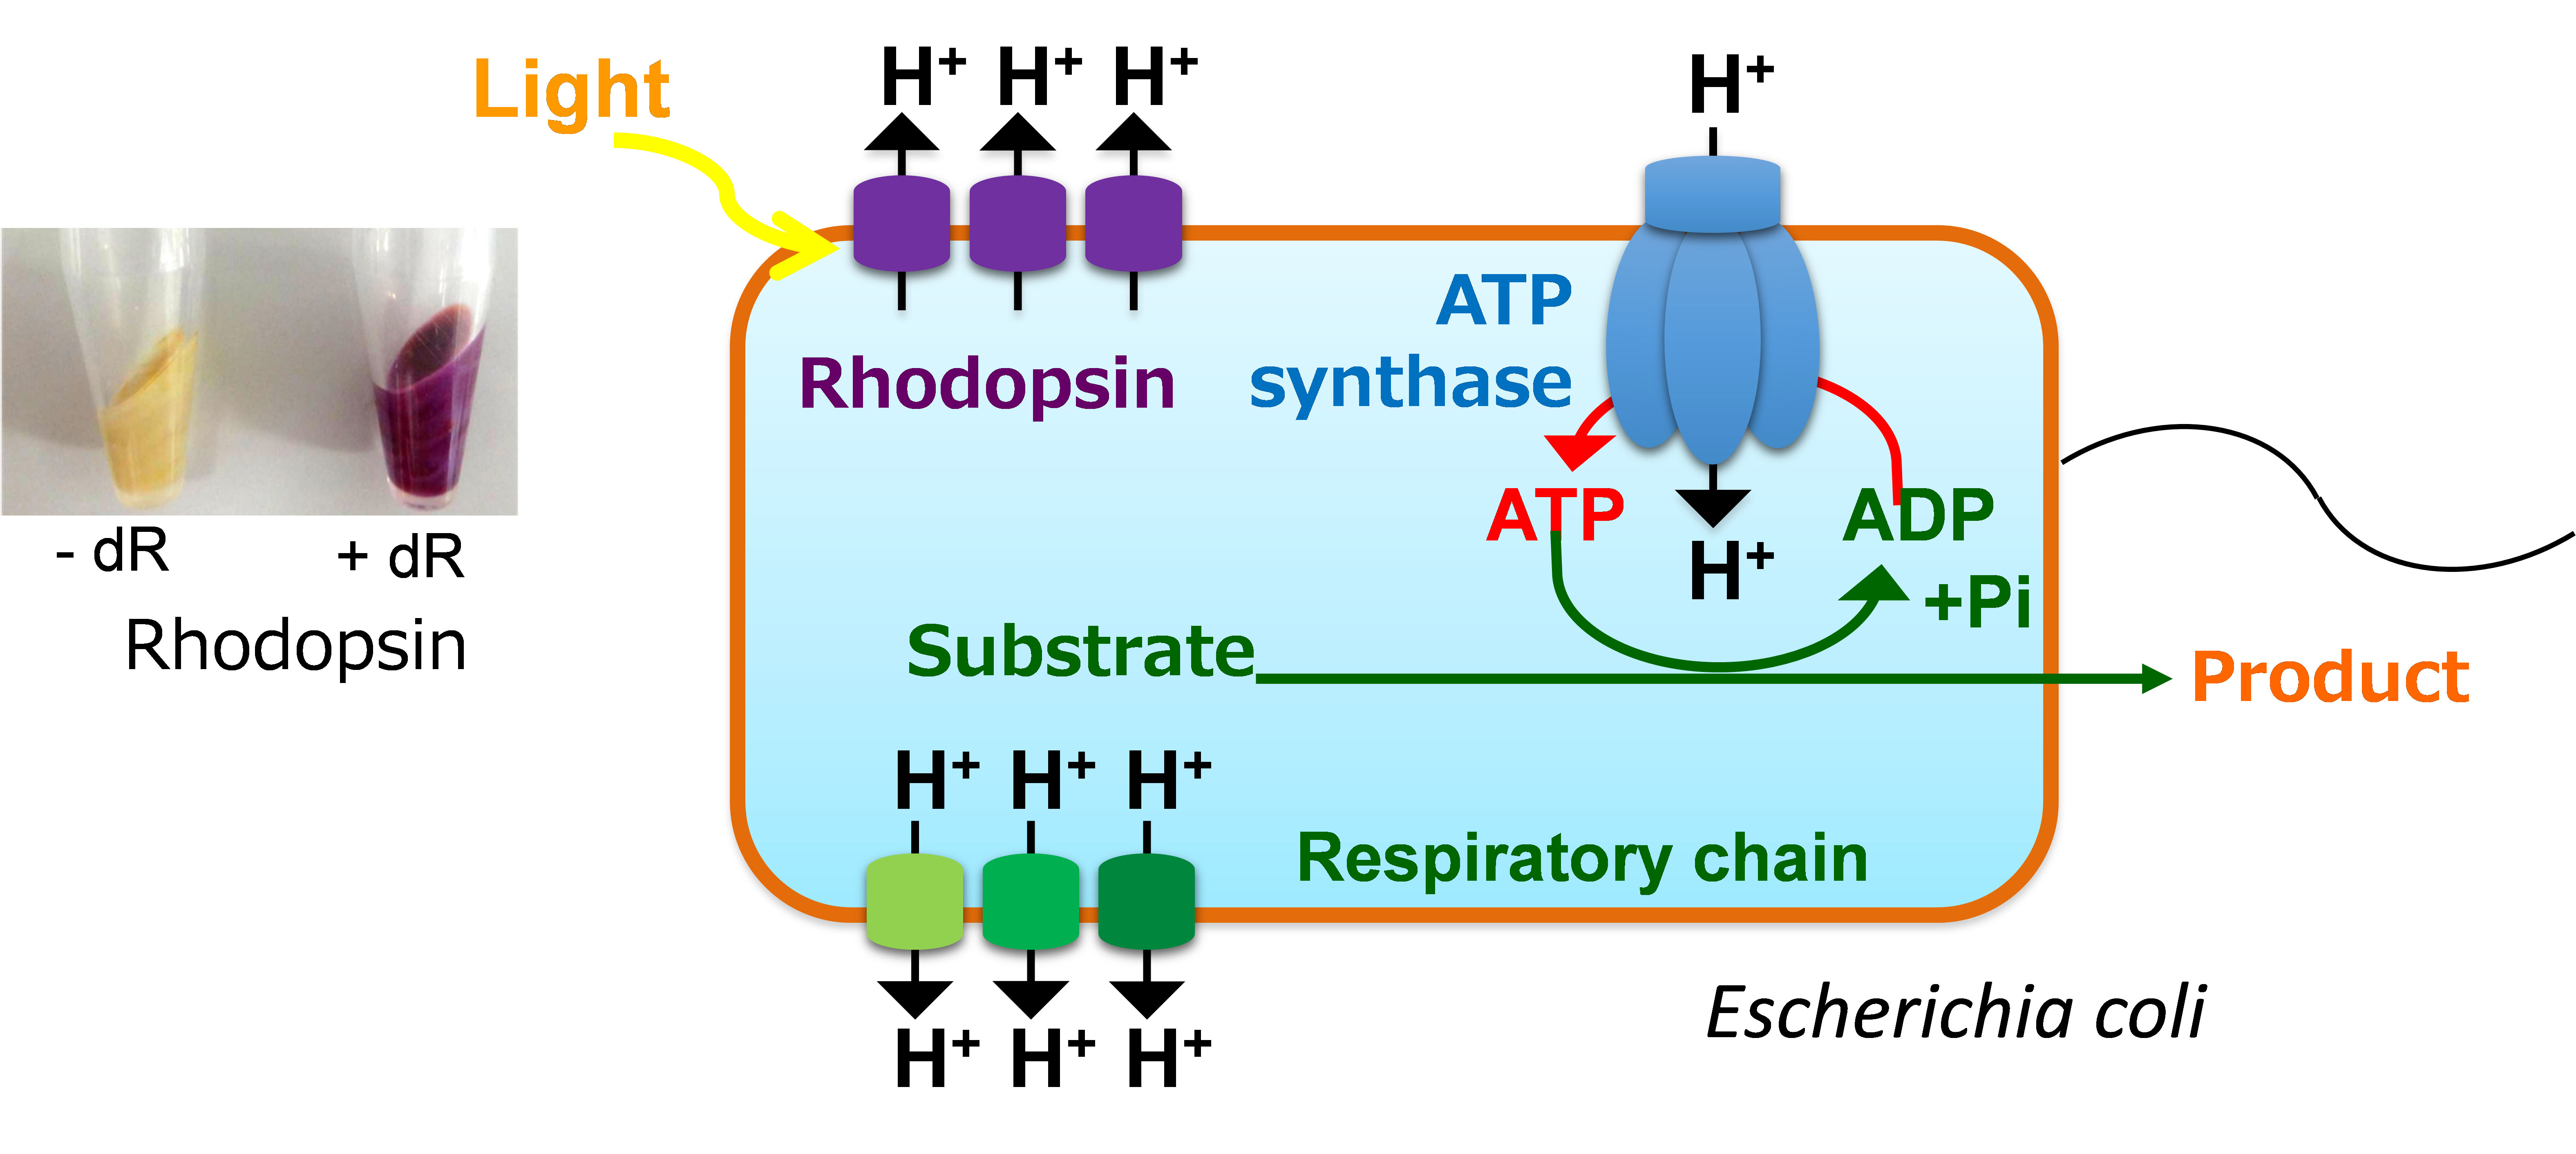 Light-powering acceleration of ATP-driven production of useful chemical in E. coli expressing rhodopsin